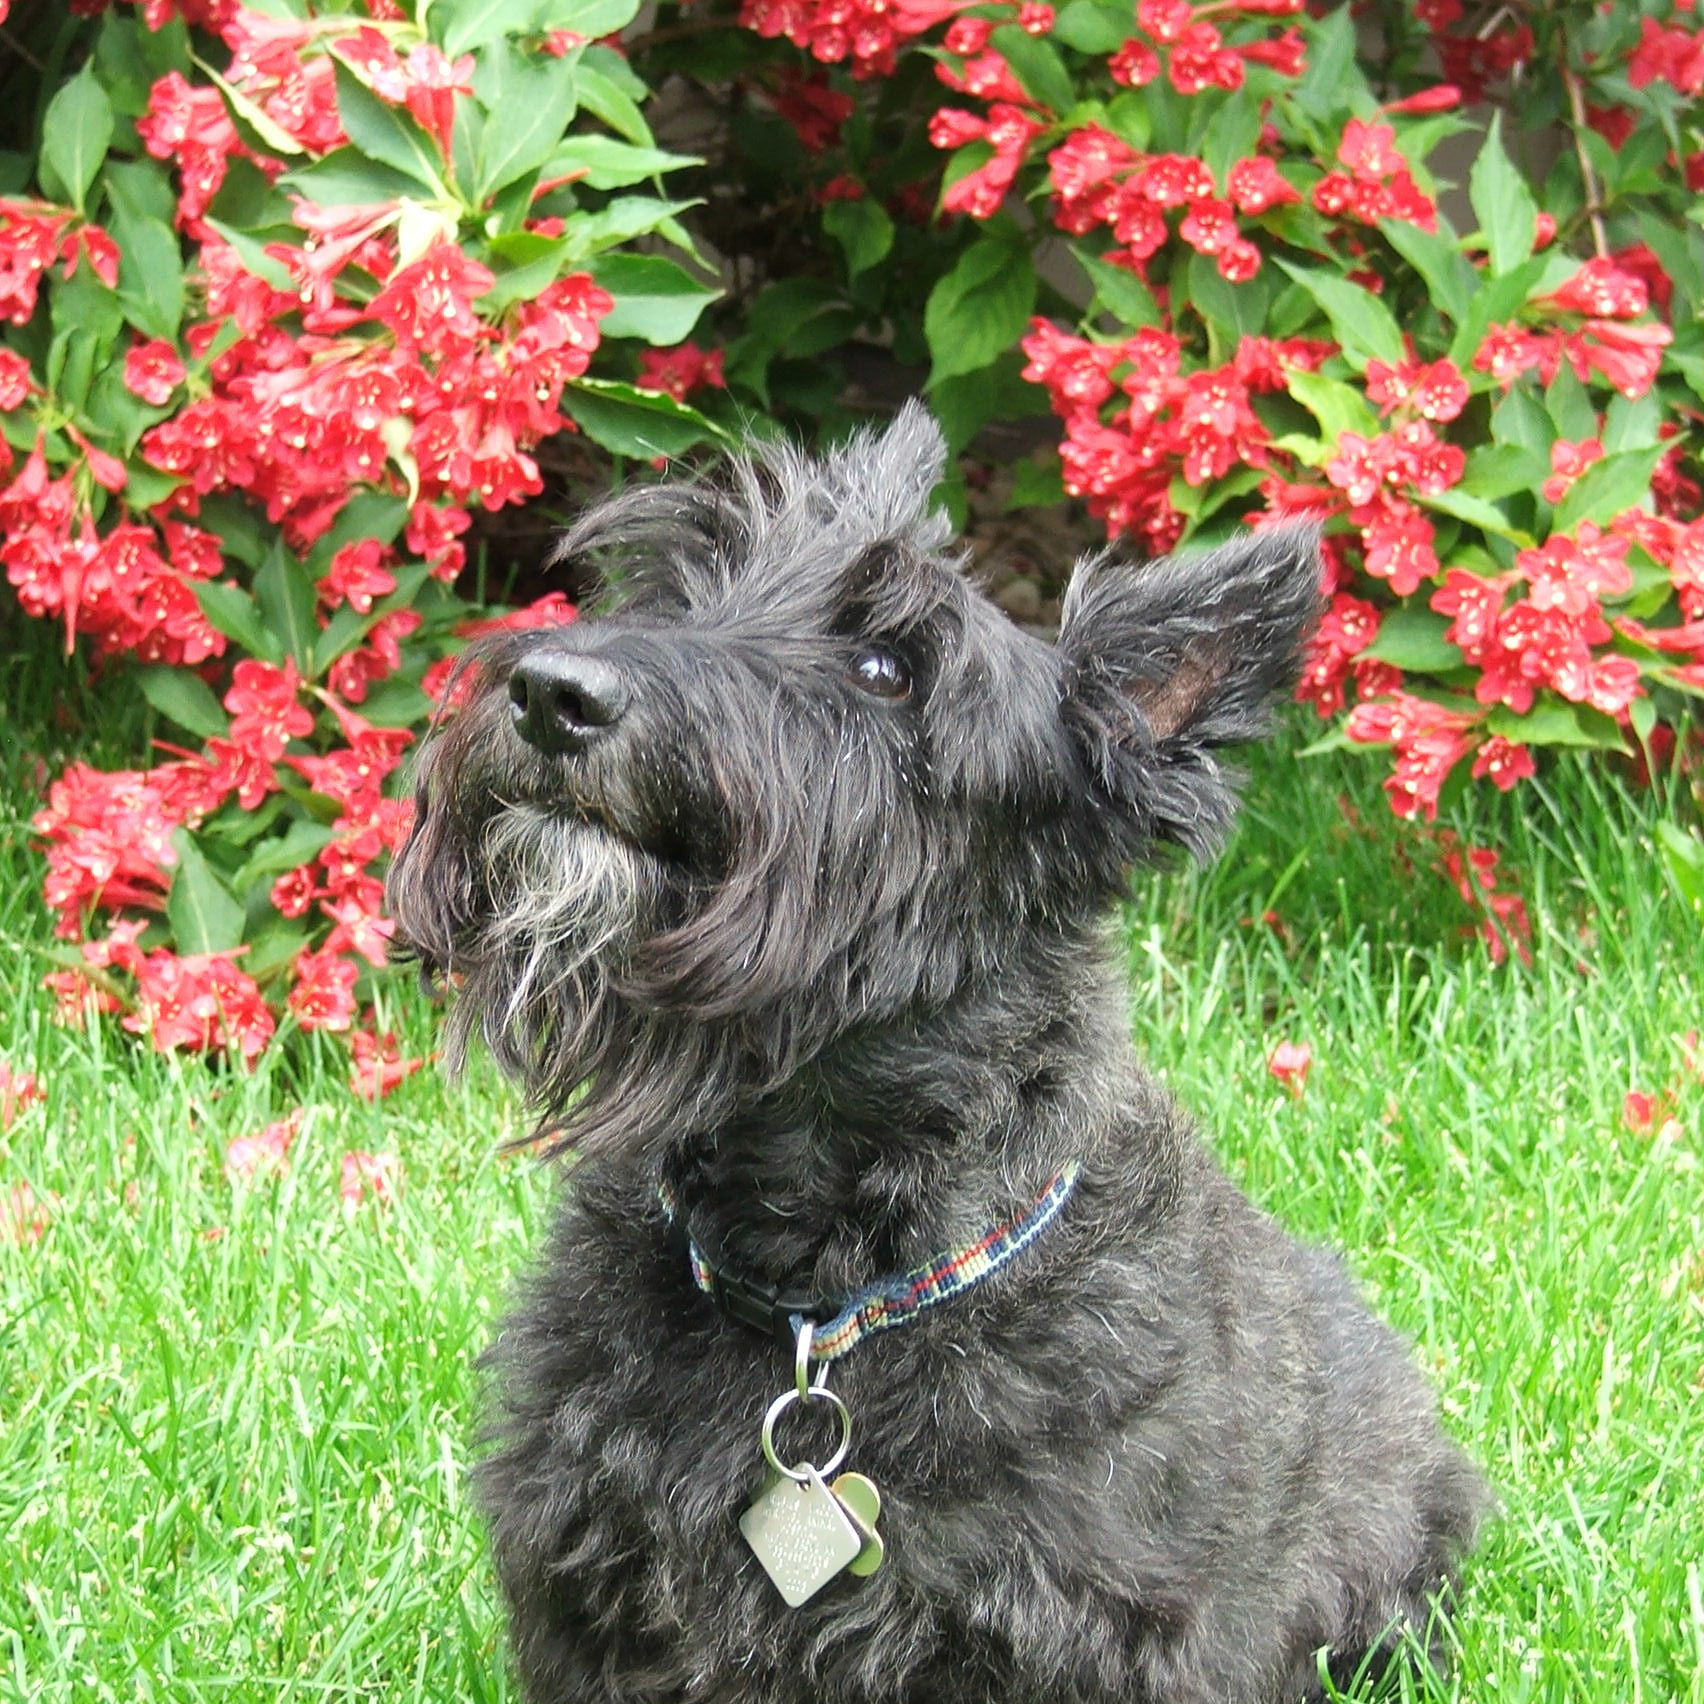 Scottish Terrier Looking Up Smiling | Taste of the Wild